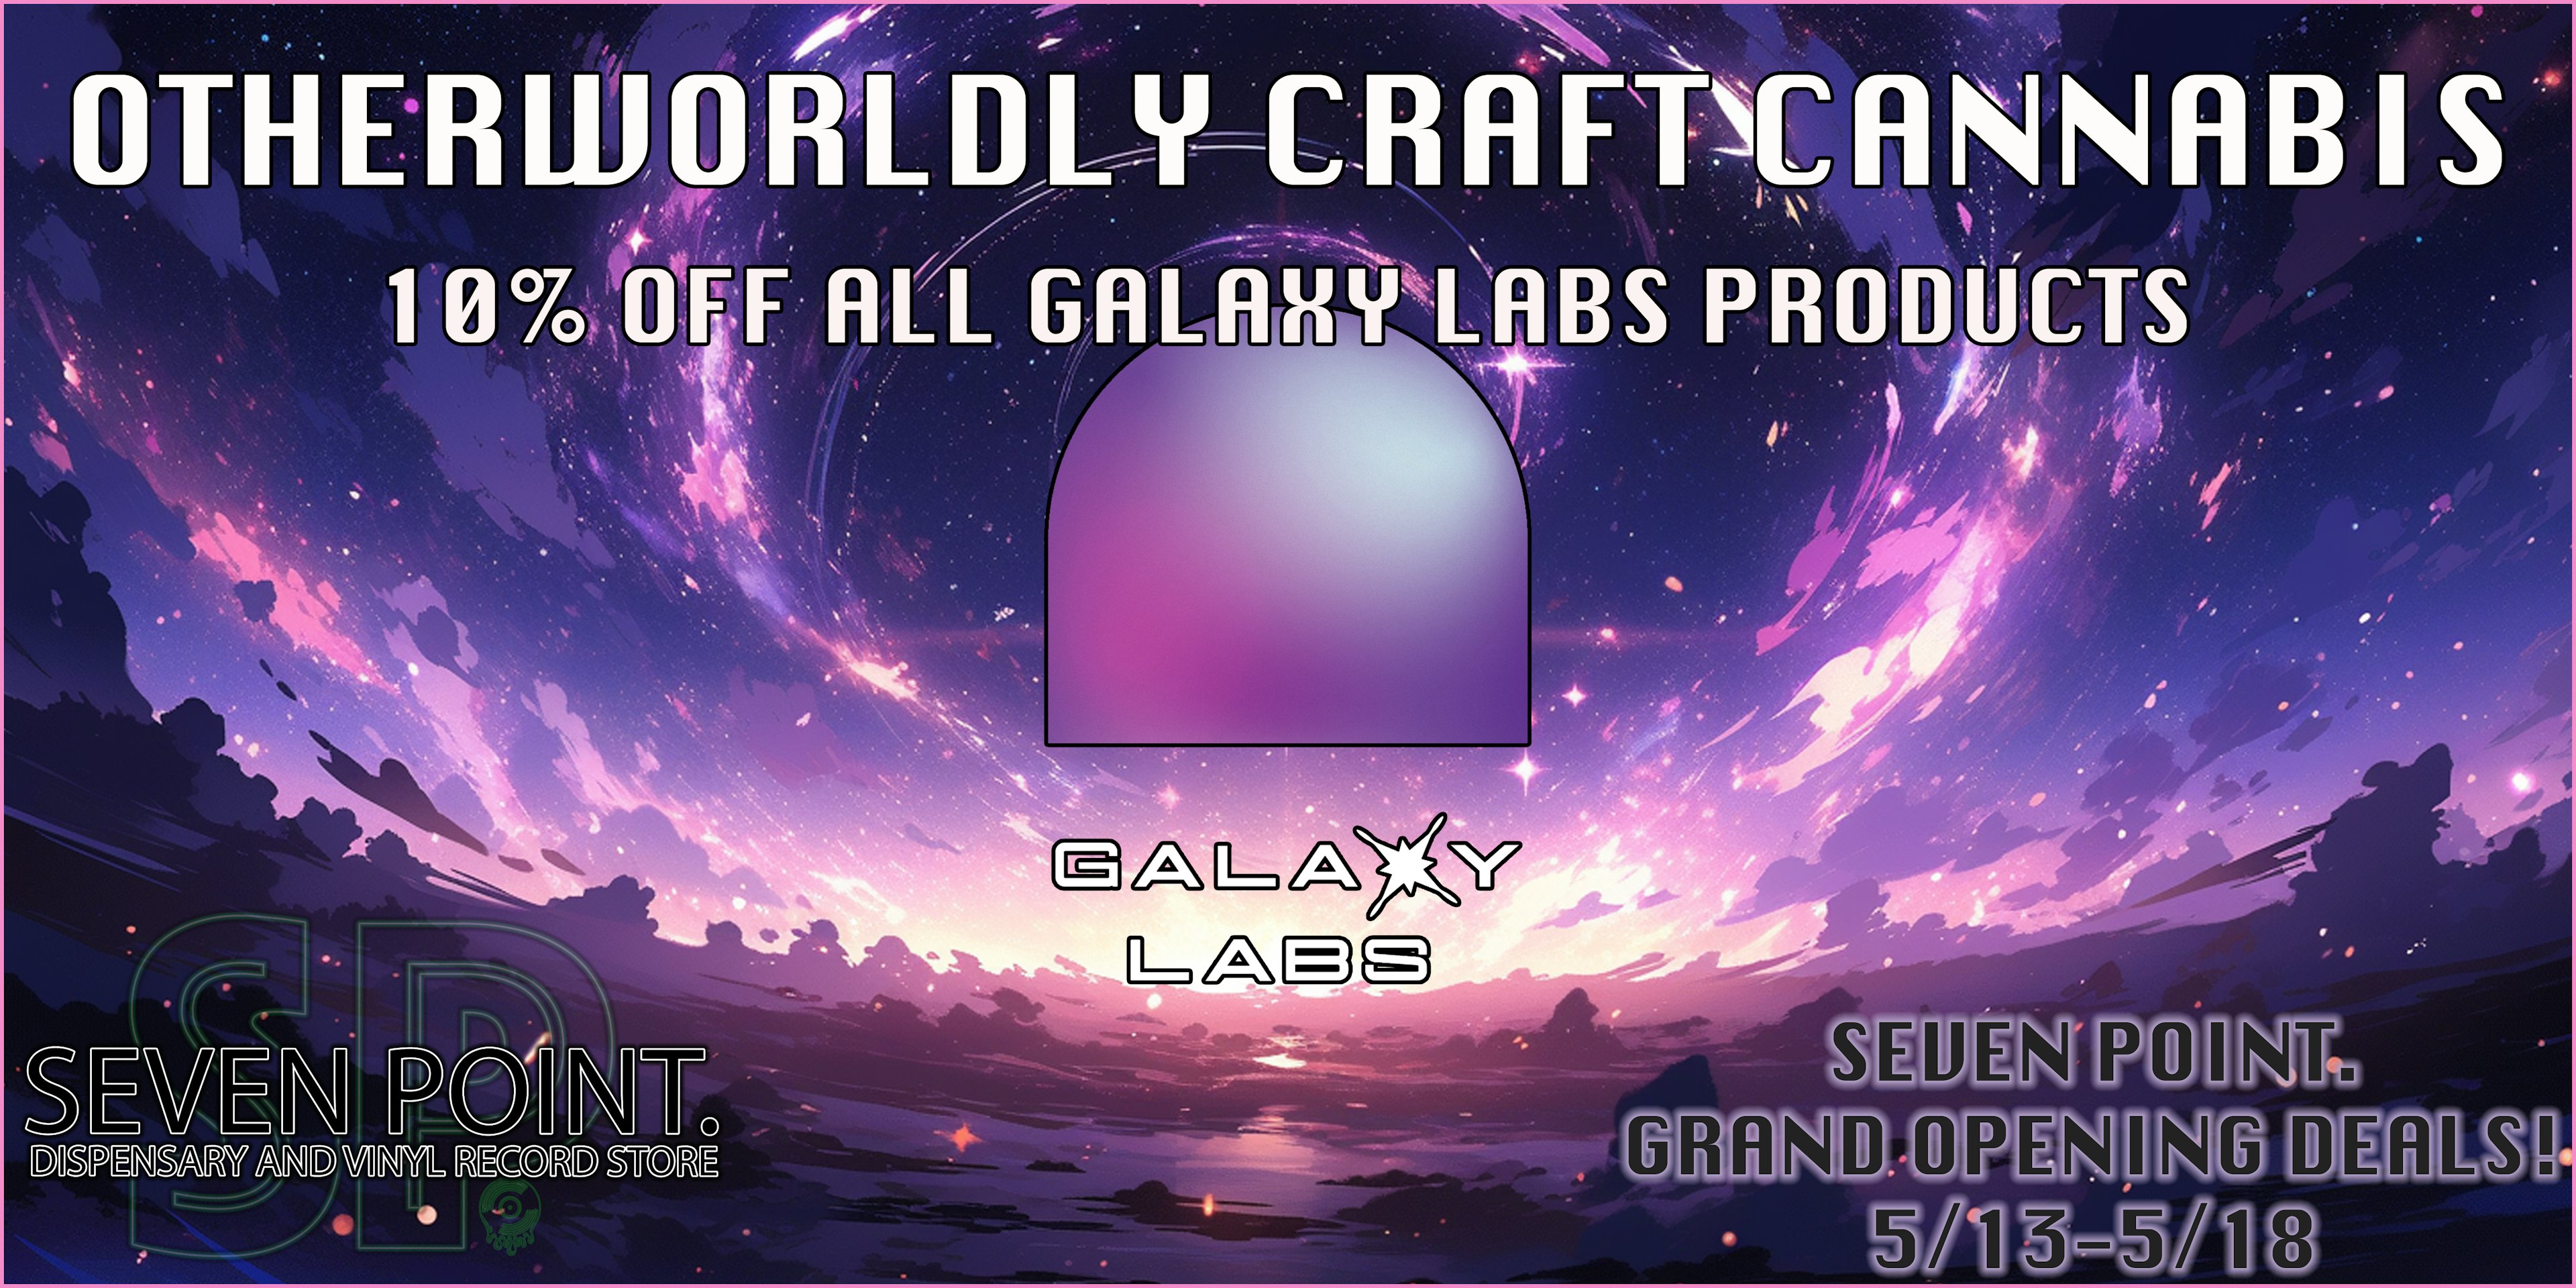 10% OFF ALL GALAXY LABS